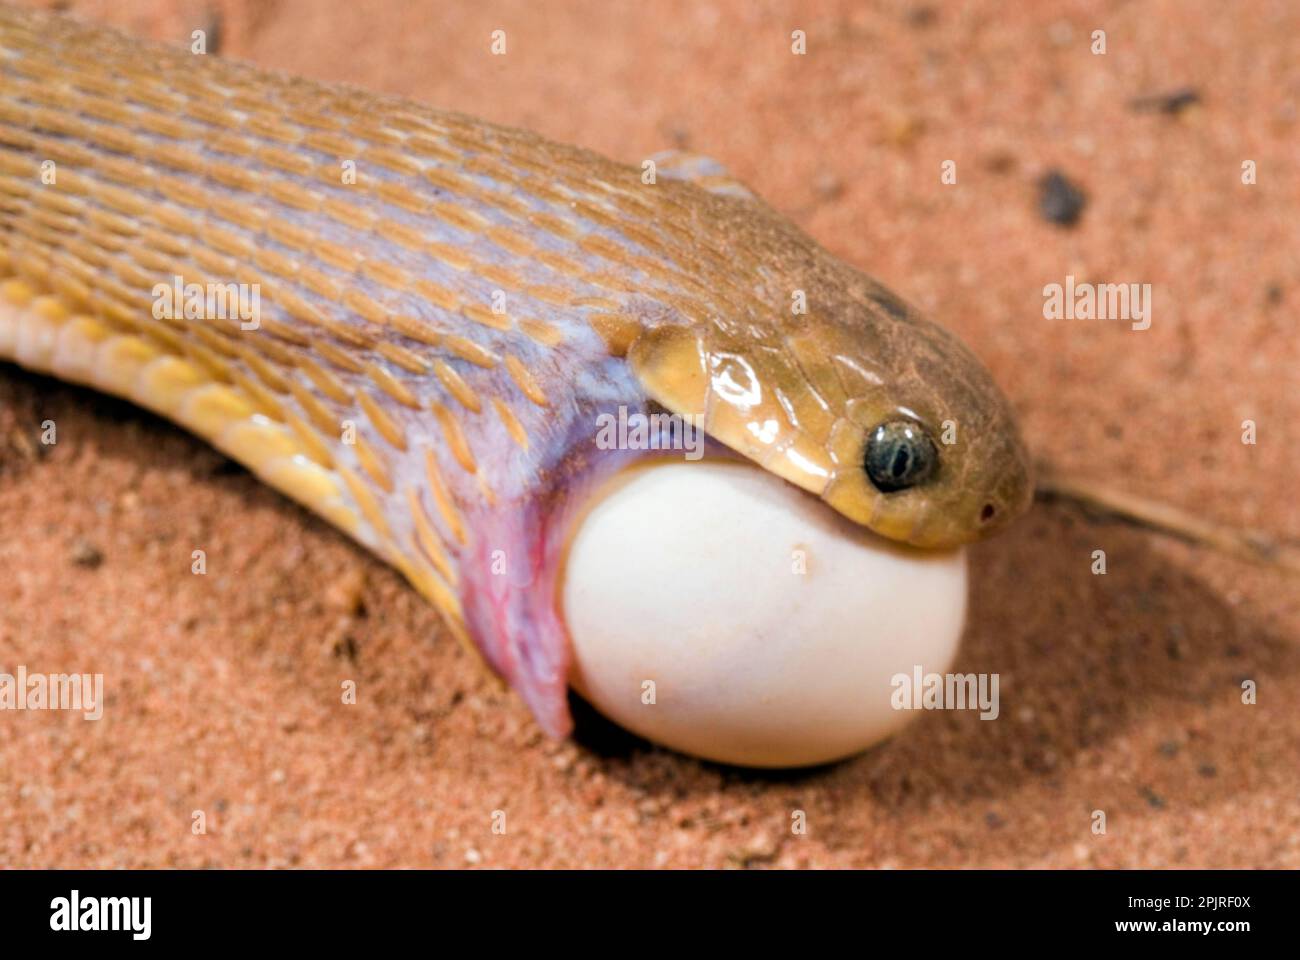 African Egg-eater Snake, Other animals, Reptiles, Snakes, Animals, Common Egg-eater Snake (Dasypeltis scabra) adult, close-up of head, feeding on Stock Photo